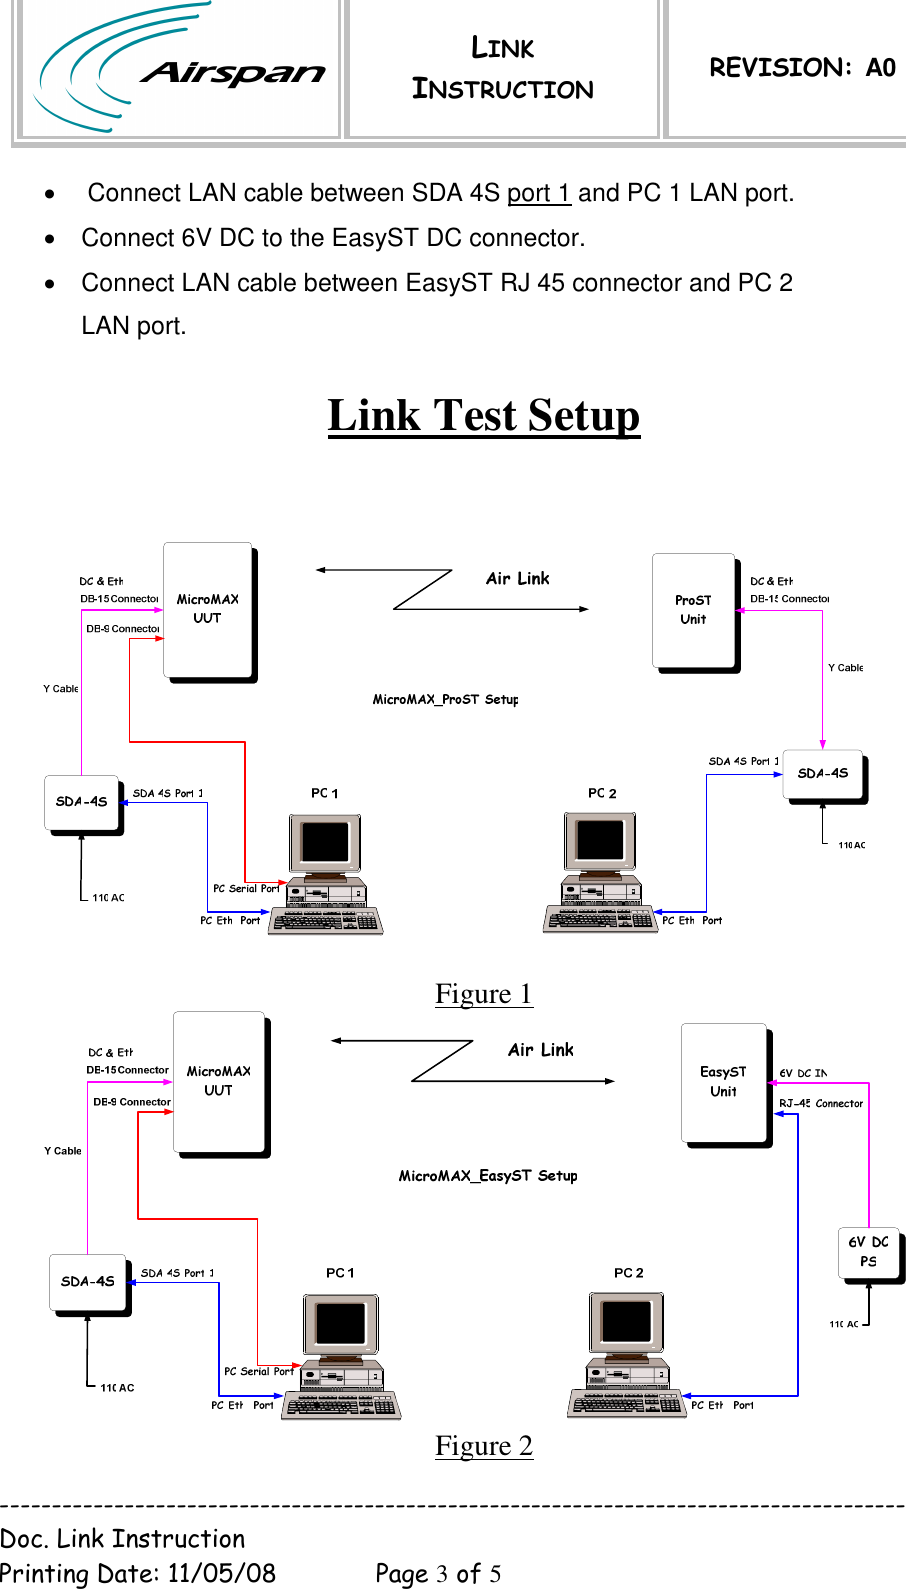  LINK INSTRUCTION REVISION: A0  --------------------------------------------------------------------------------------- Doc. Link Instruction   Printing Date: 11/05/08  Page 3 of 5  •  Connect LAN cable between SDA 4S port 1 and PC 1 LAN port.  •  Connect 6V DC to the EasyST DC connector.  •  Connect LAN cable between EasyST RJ 45 connector and PC 2 LAN port.   Test SetupLink       1Figure  2Figure  